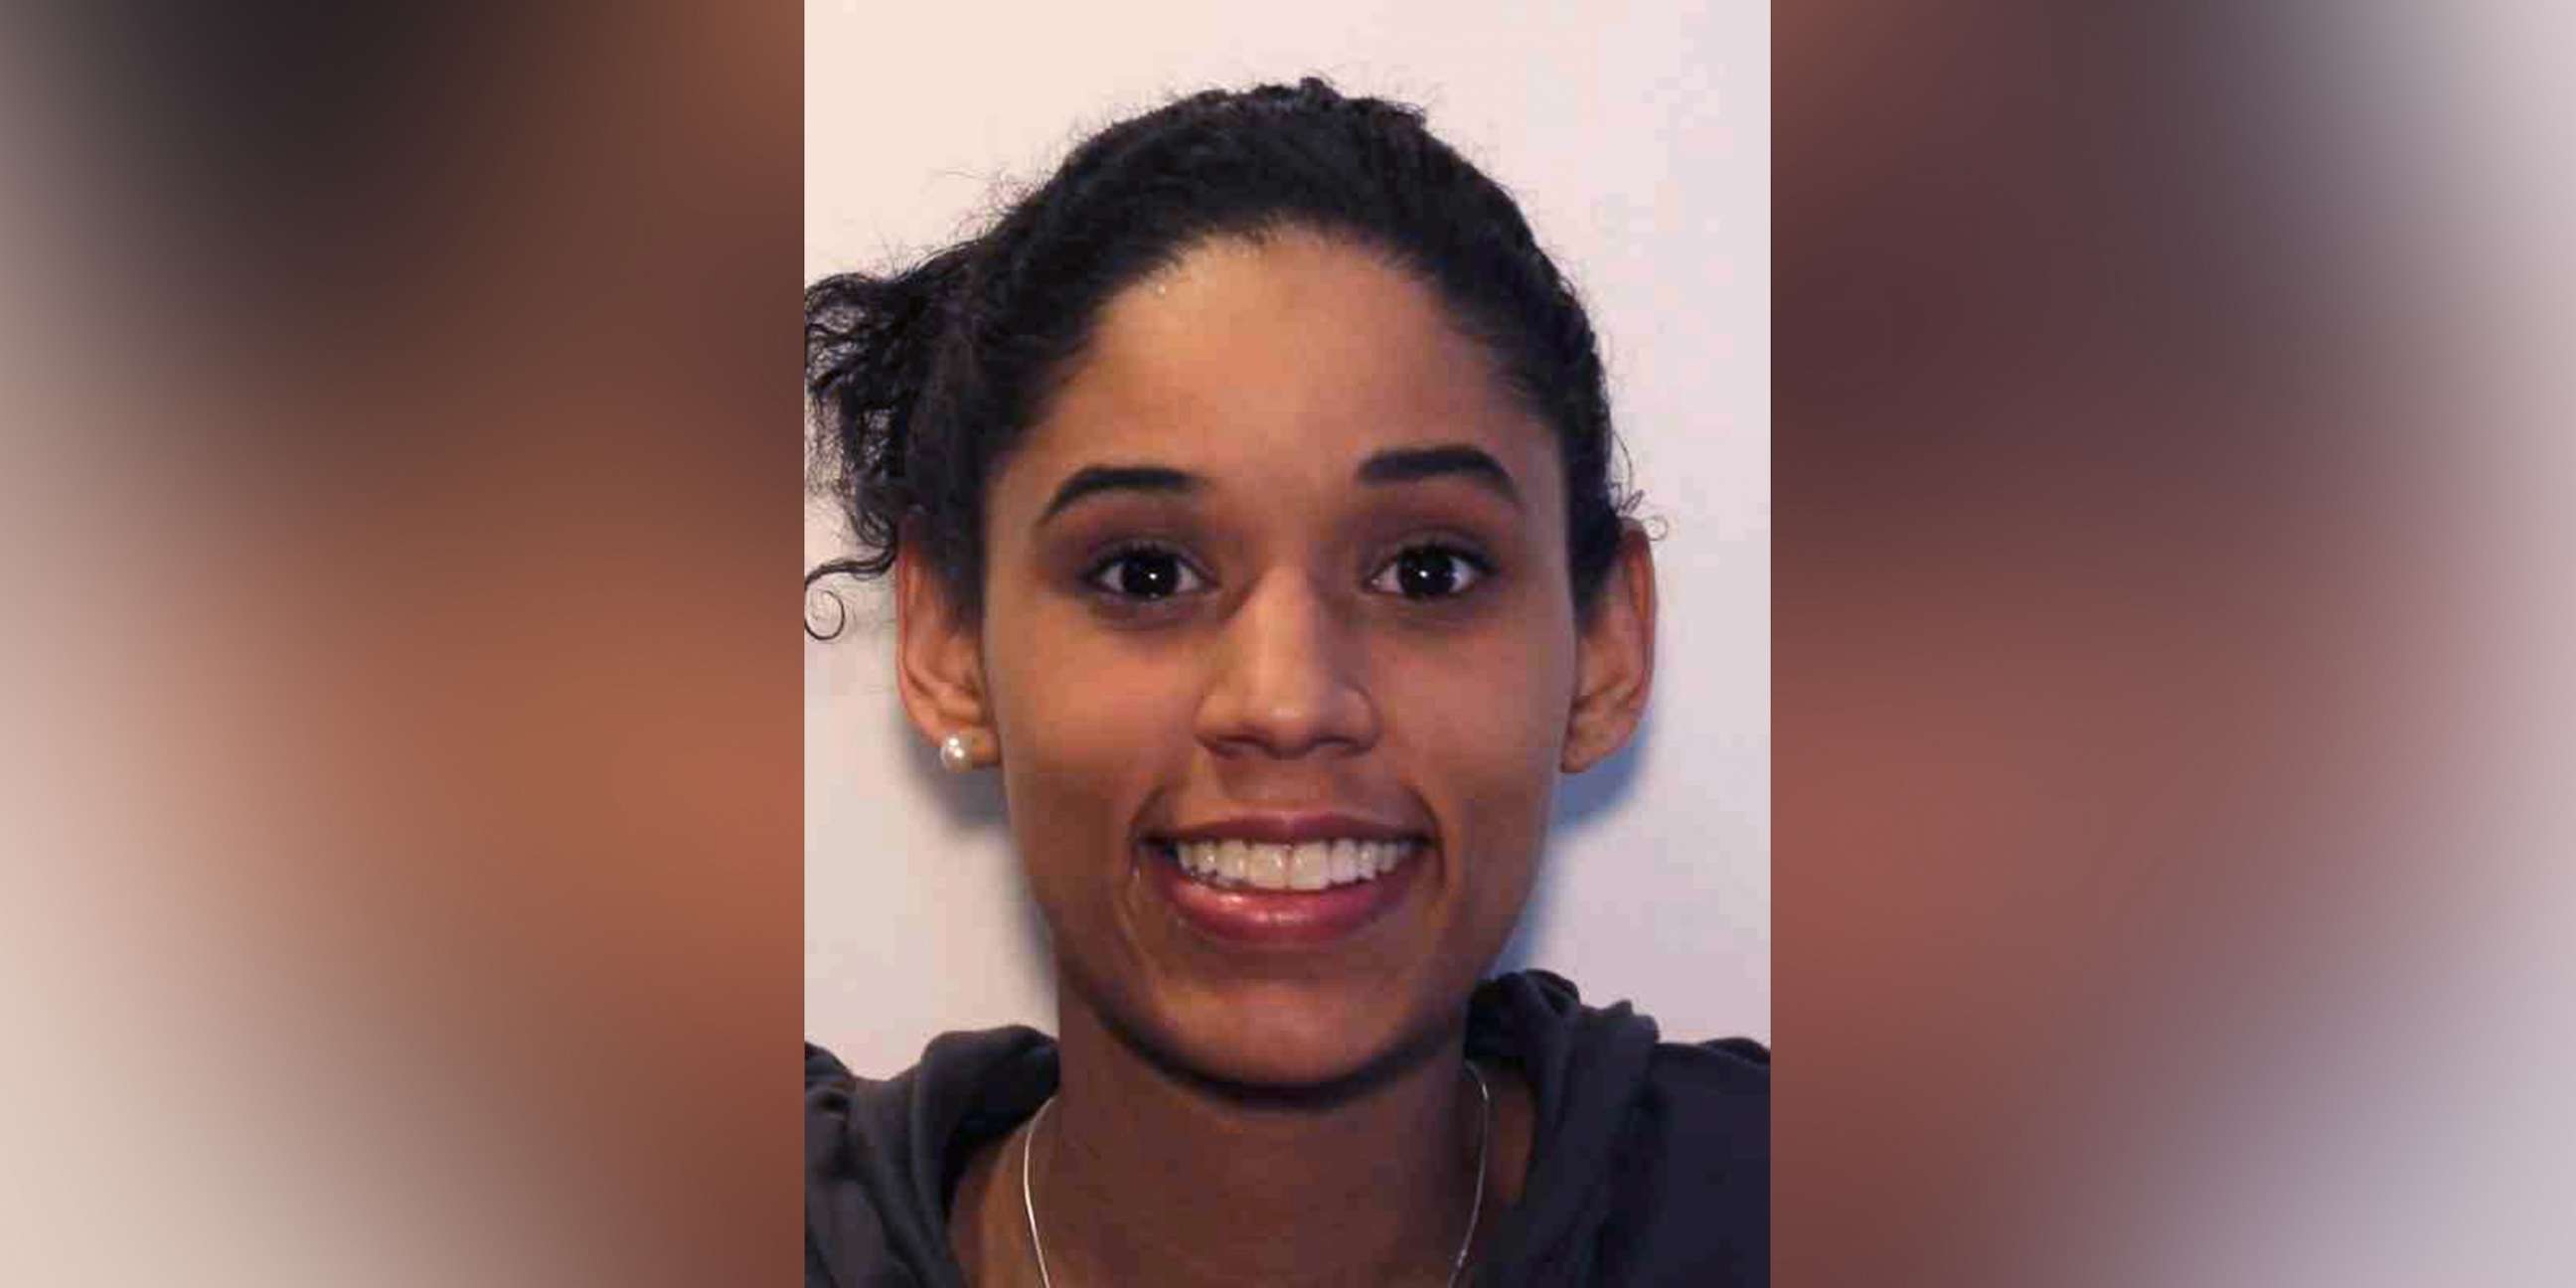 PHOTO: Authorities are asking for the public's help in finding Leila Cavett, 21, a missing Georgia mother, whose toddler was found alone in Miramar, Fla., on July 26, 2020.